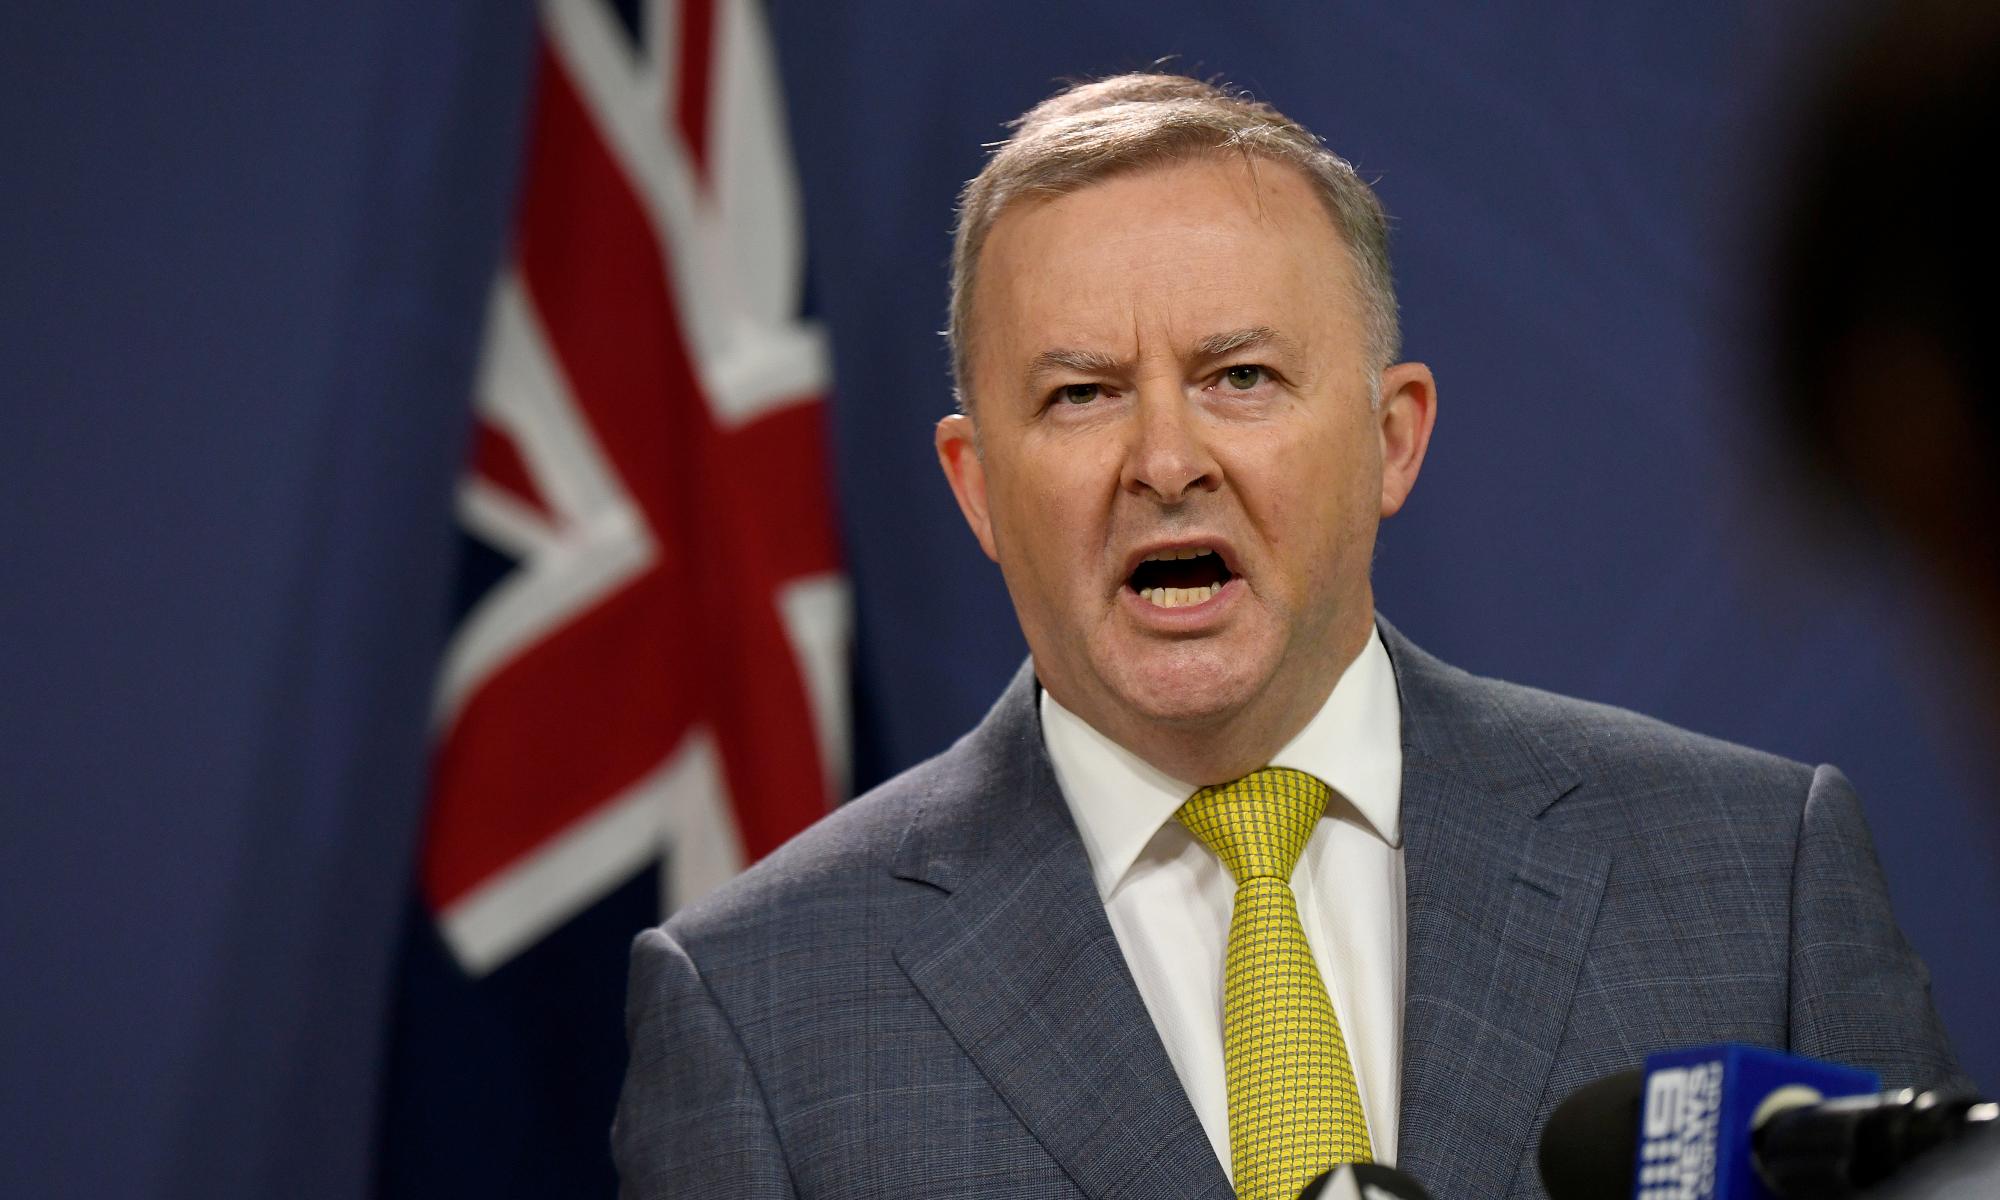 Anthony Albanese says Labor's 45% emissions reduction target 'a mistake'